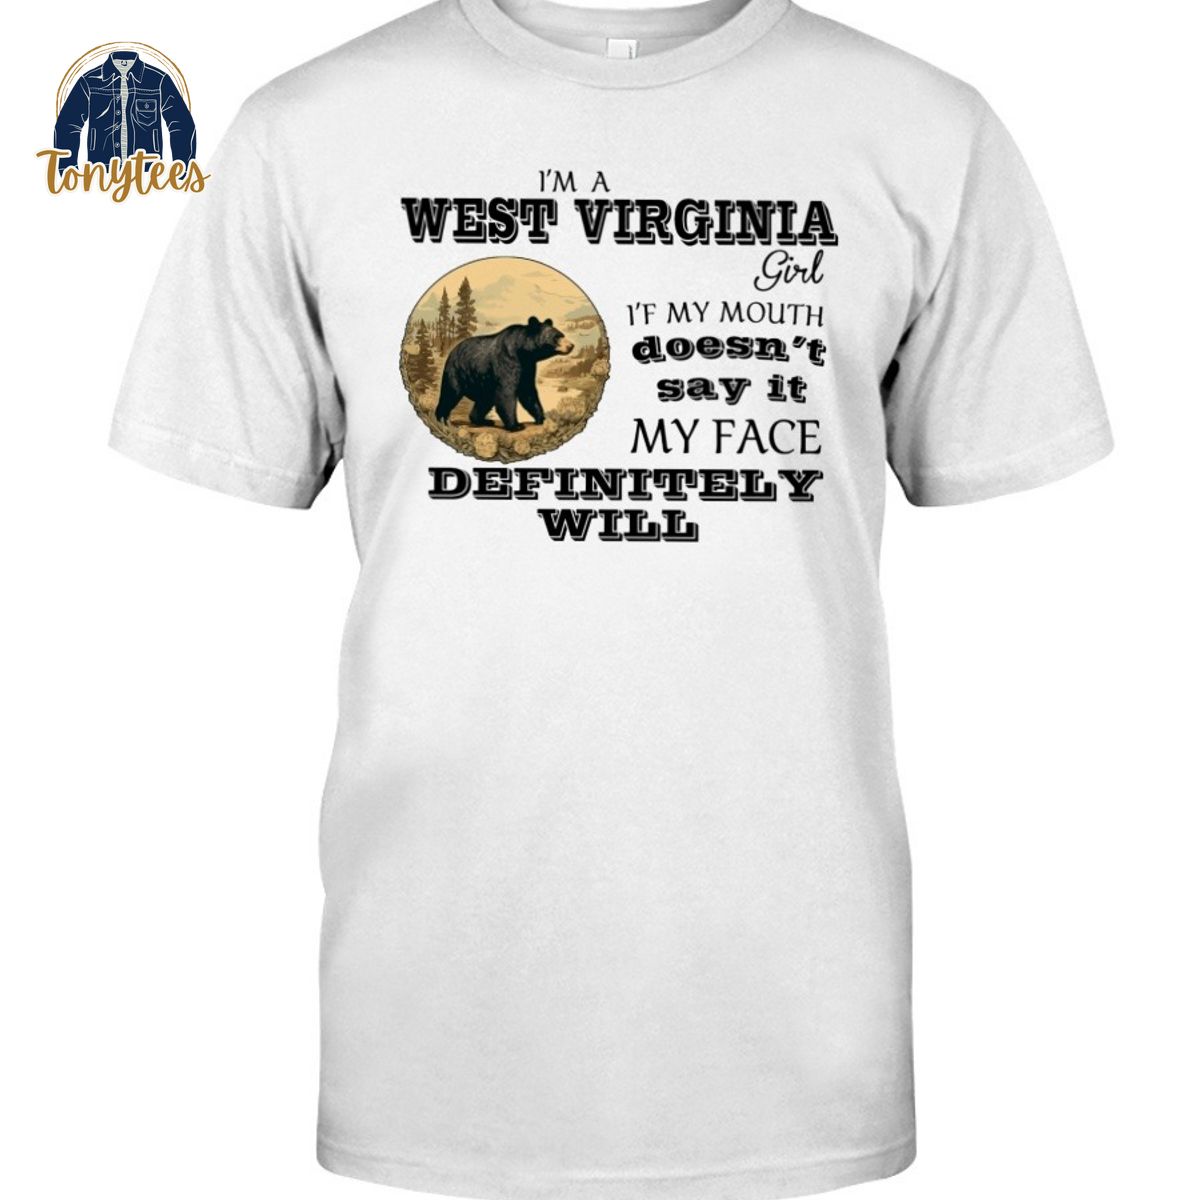 I am a West Virginia girl if my mouth doesn’t say it my face definitely will shirt